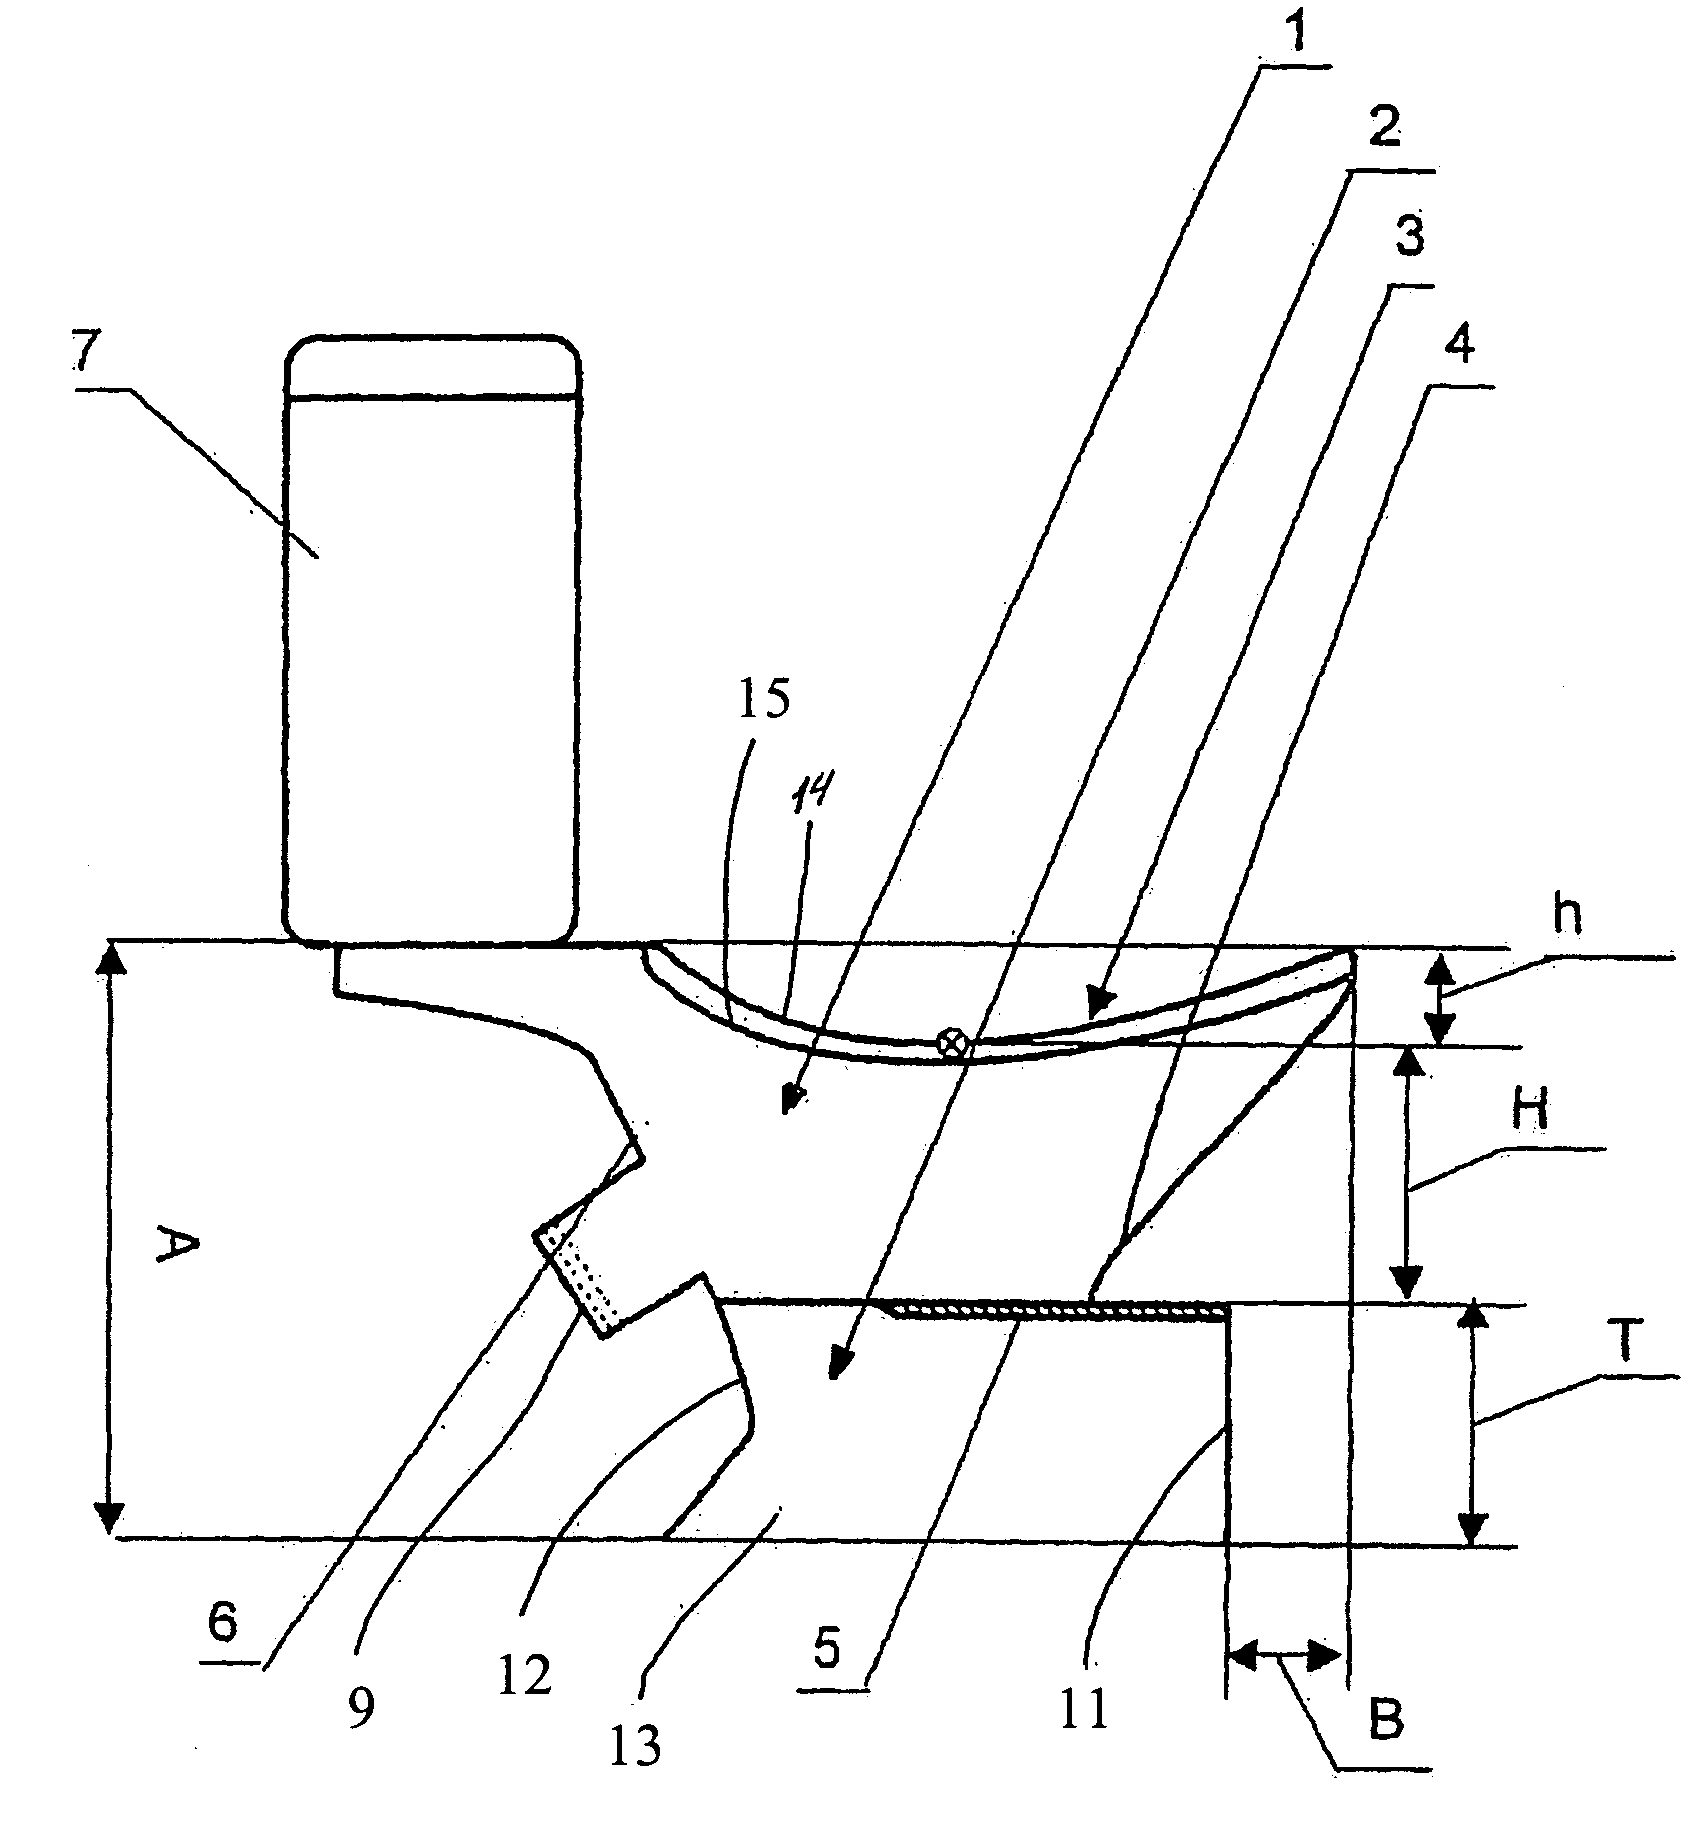 Toilet apparatus providing a user with a physiologically natural position during bowel movement